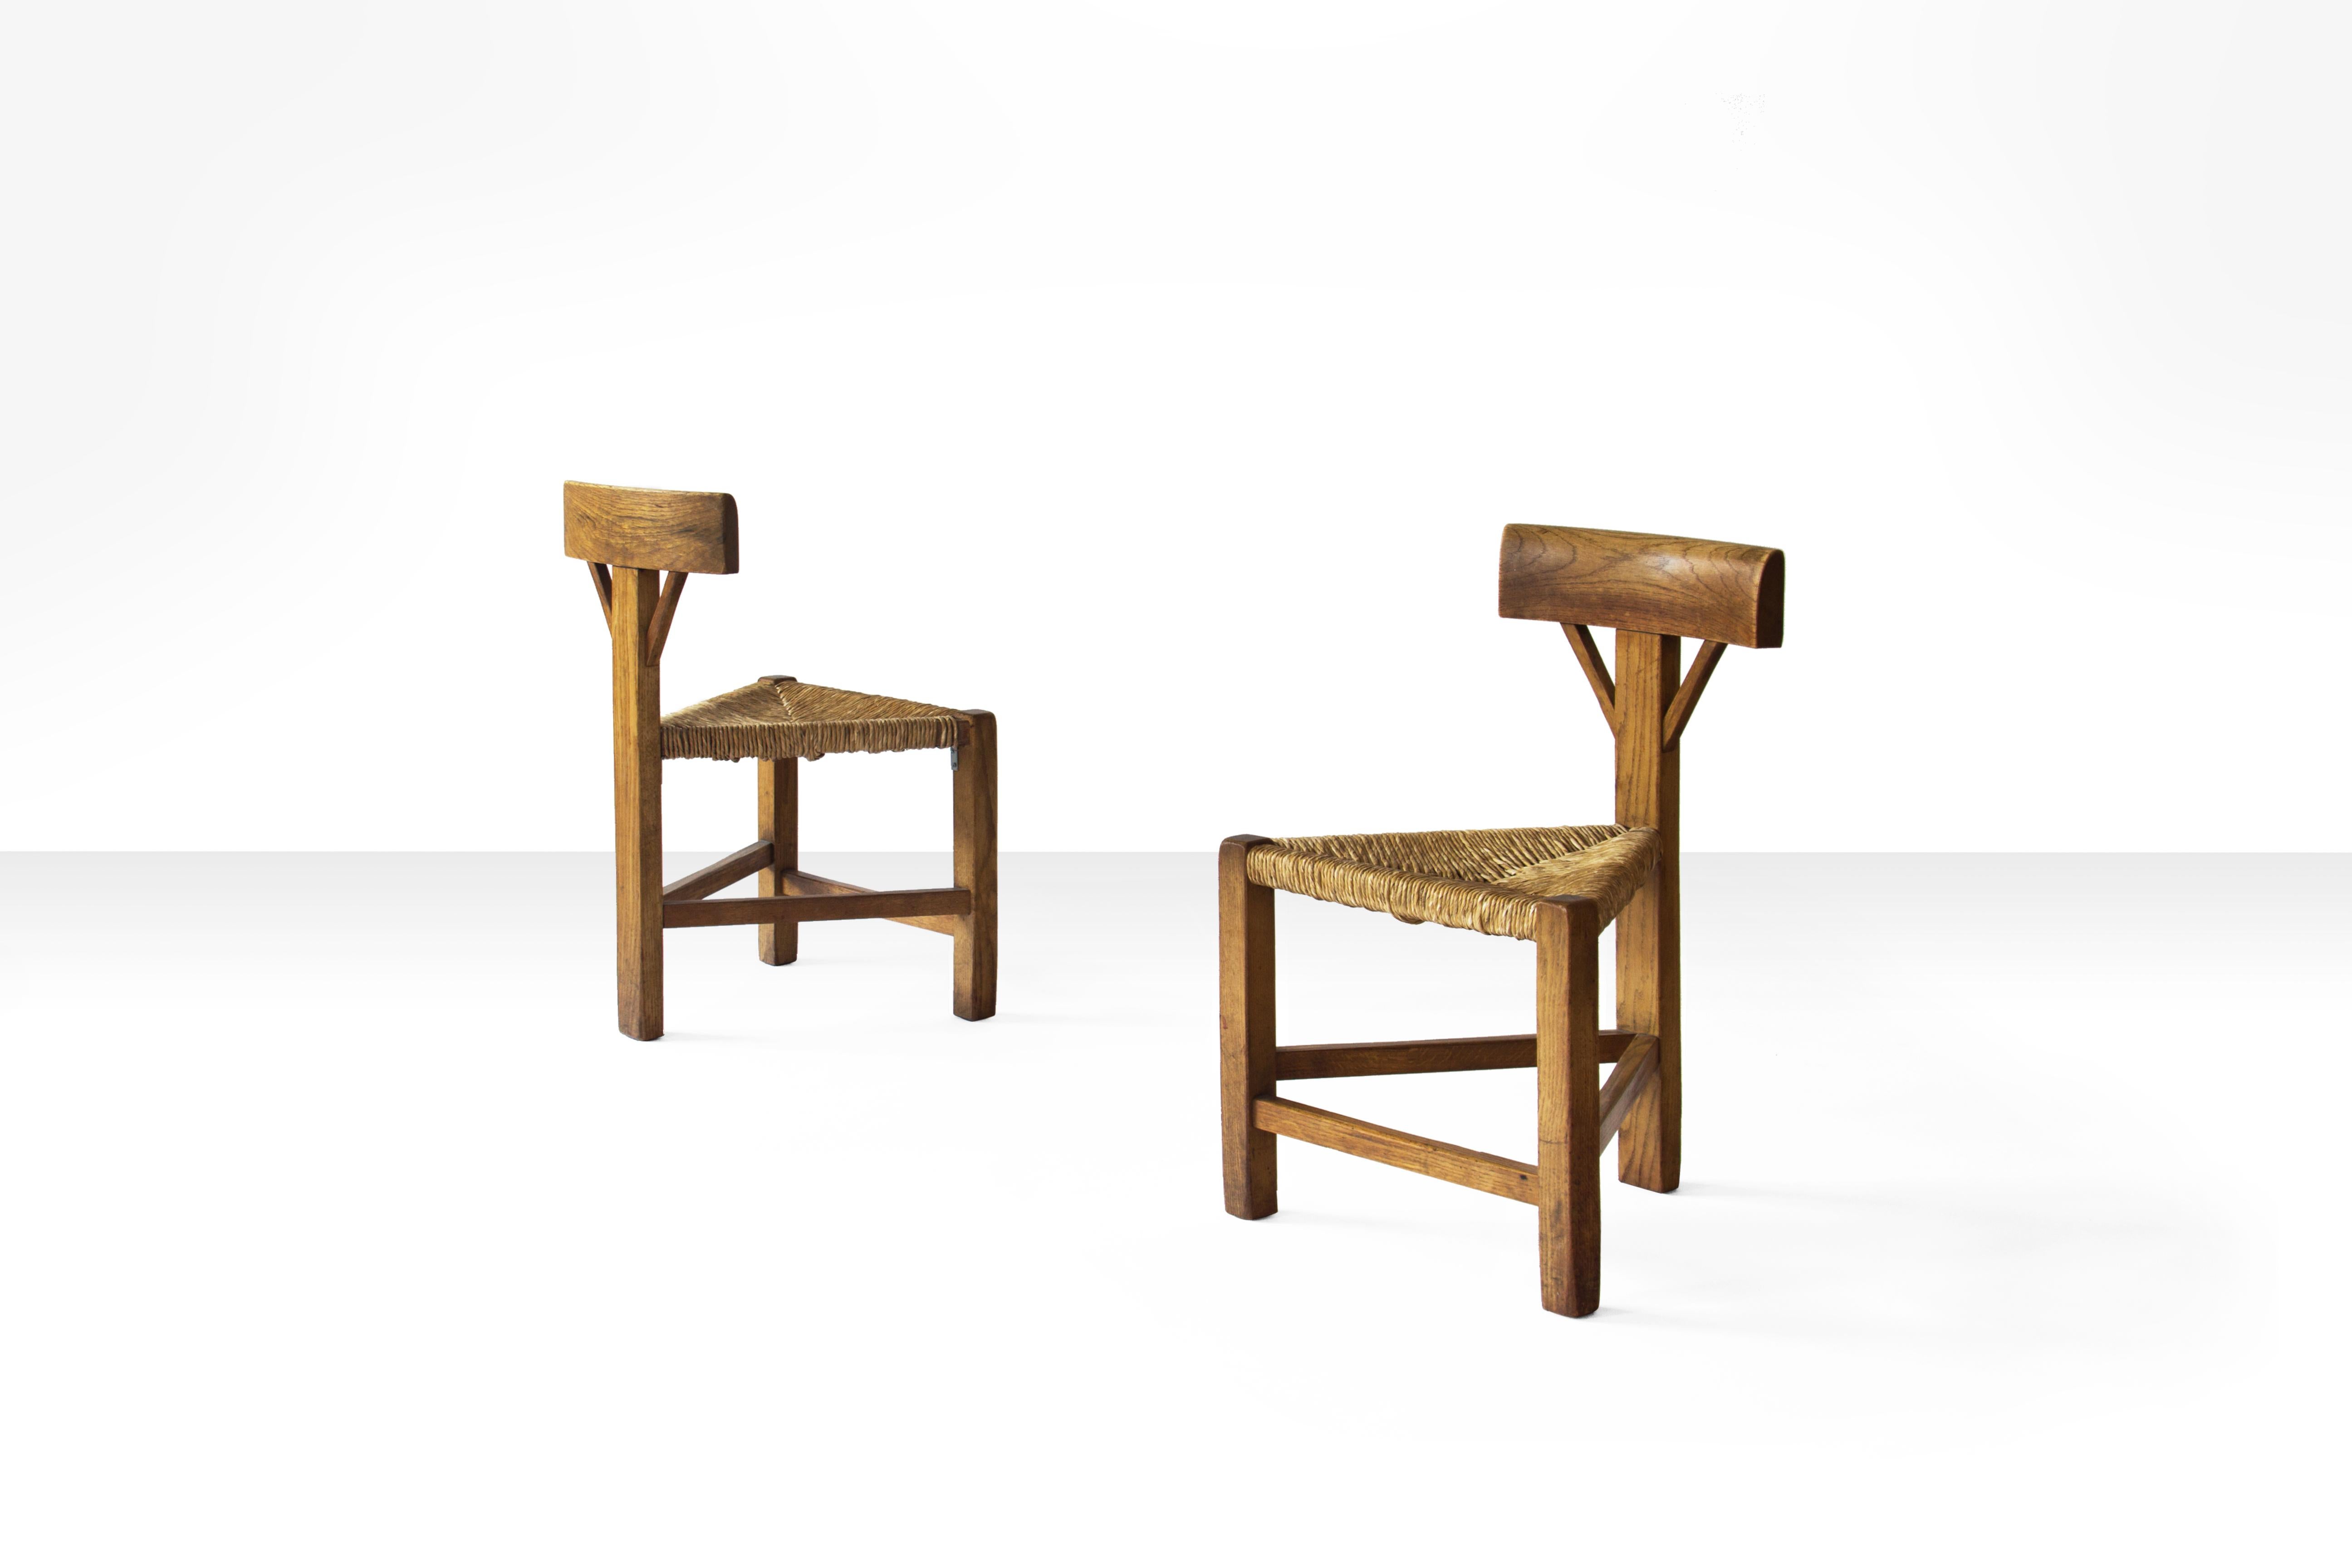 Pair of triangular midcentury chairs in oak and cane in the manner of Charlotte Perriand. Most likely they originate from The Netherlands ca 1960s-1970s. It's also possible that they are from France. The chairs are in beautiful vintage condition and